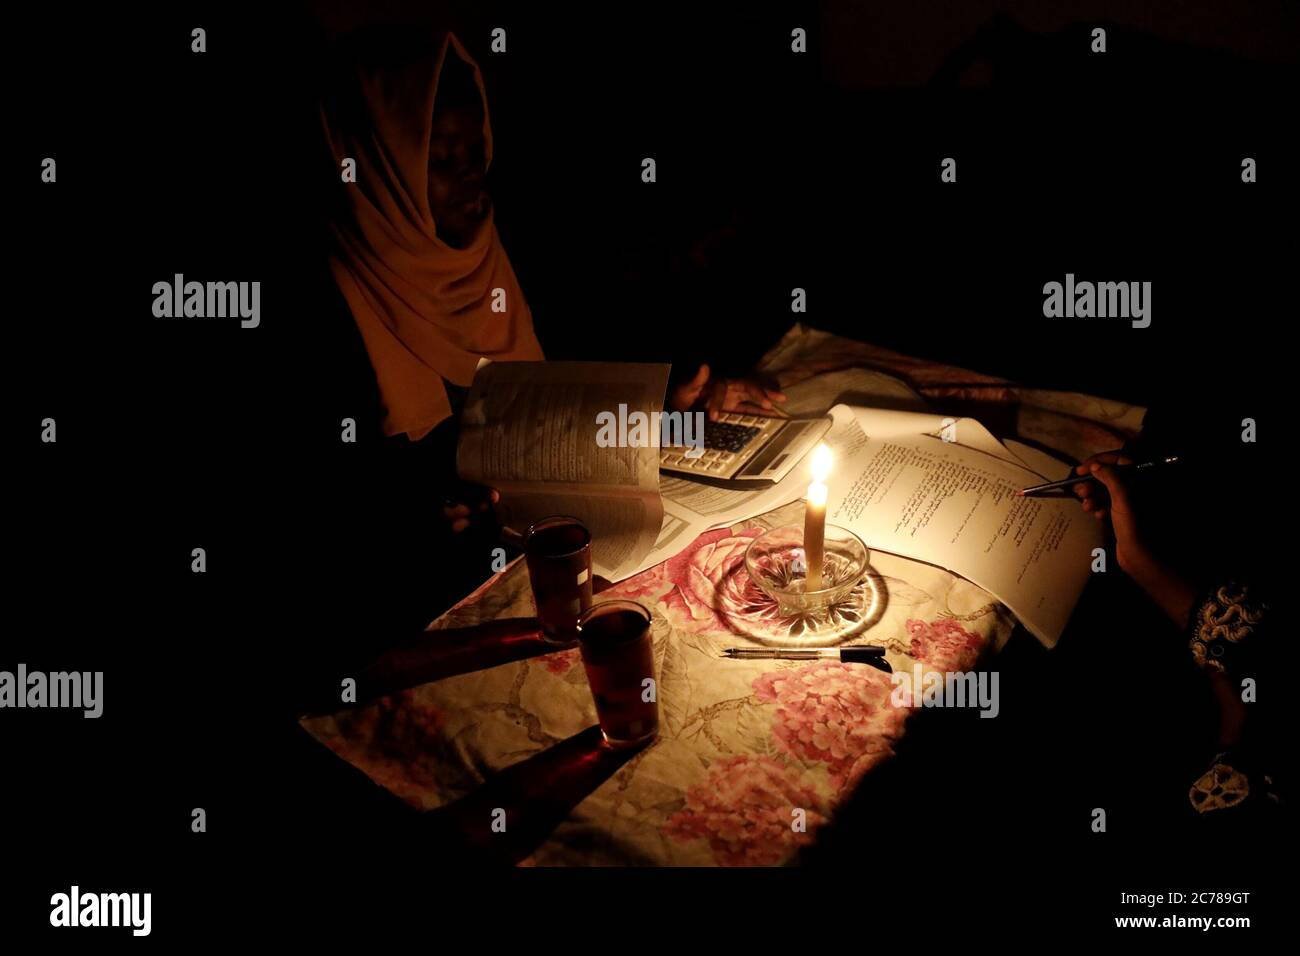 (200715) -- KHARTOUM, July 15, 2020 (Xinhua) -- A female student studies for the basic school certificate examinations under candle light after a blackout in her area under programmed power cuts in Khartoum, Sudan, July 14, 2020. (Xinhua/Mohamed Khidir) Stock Photo